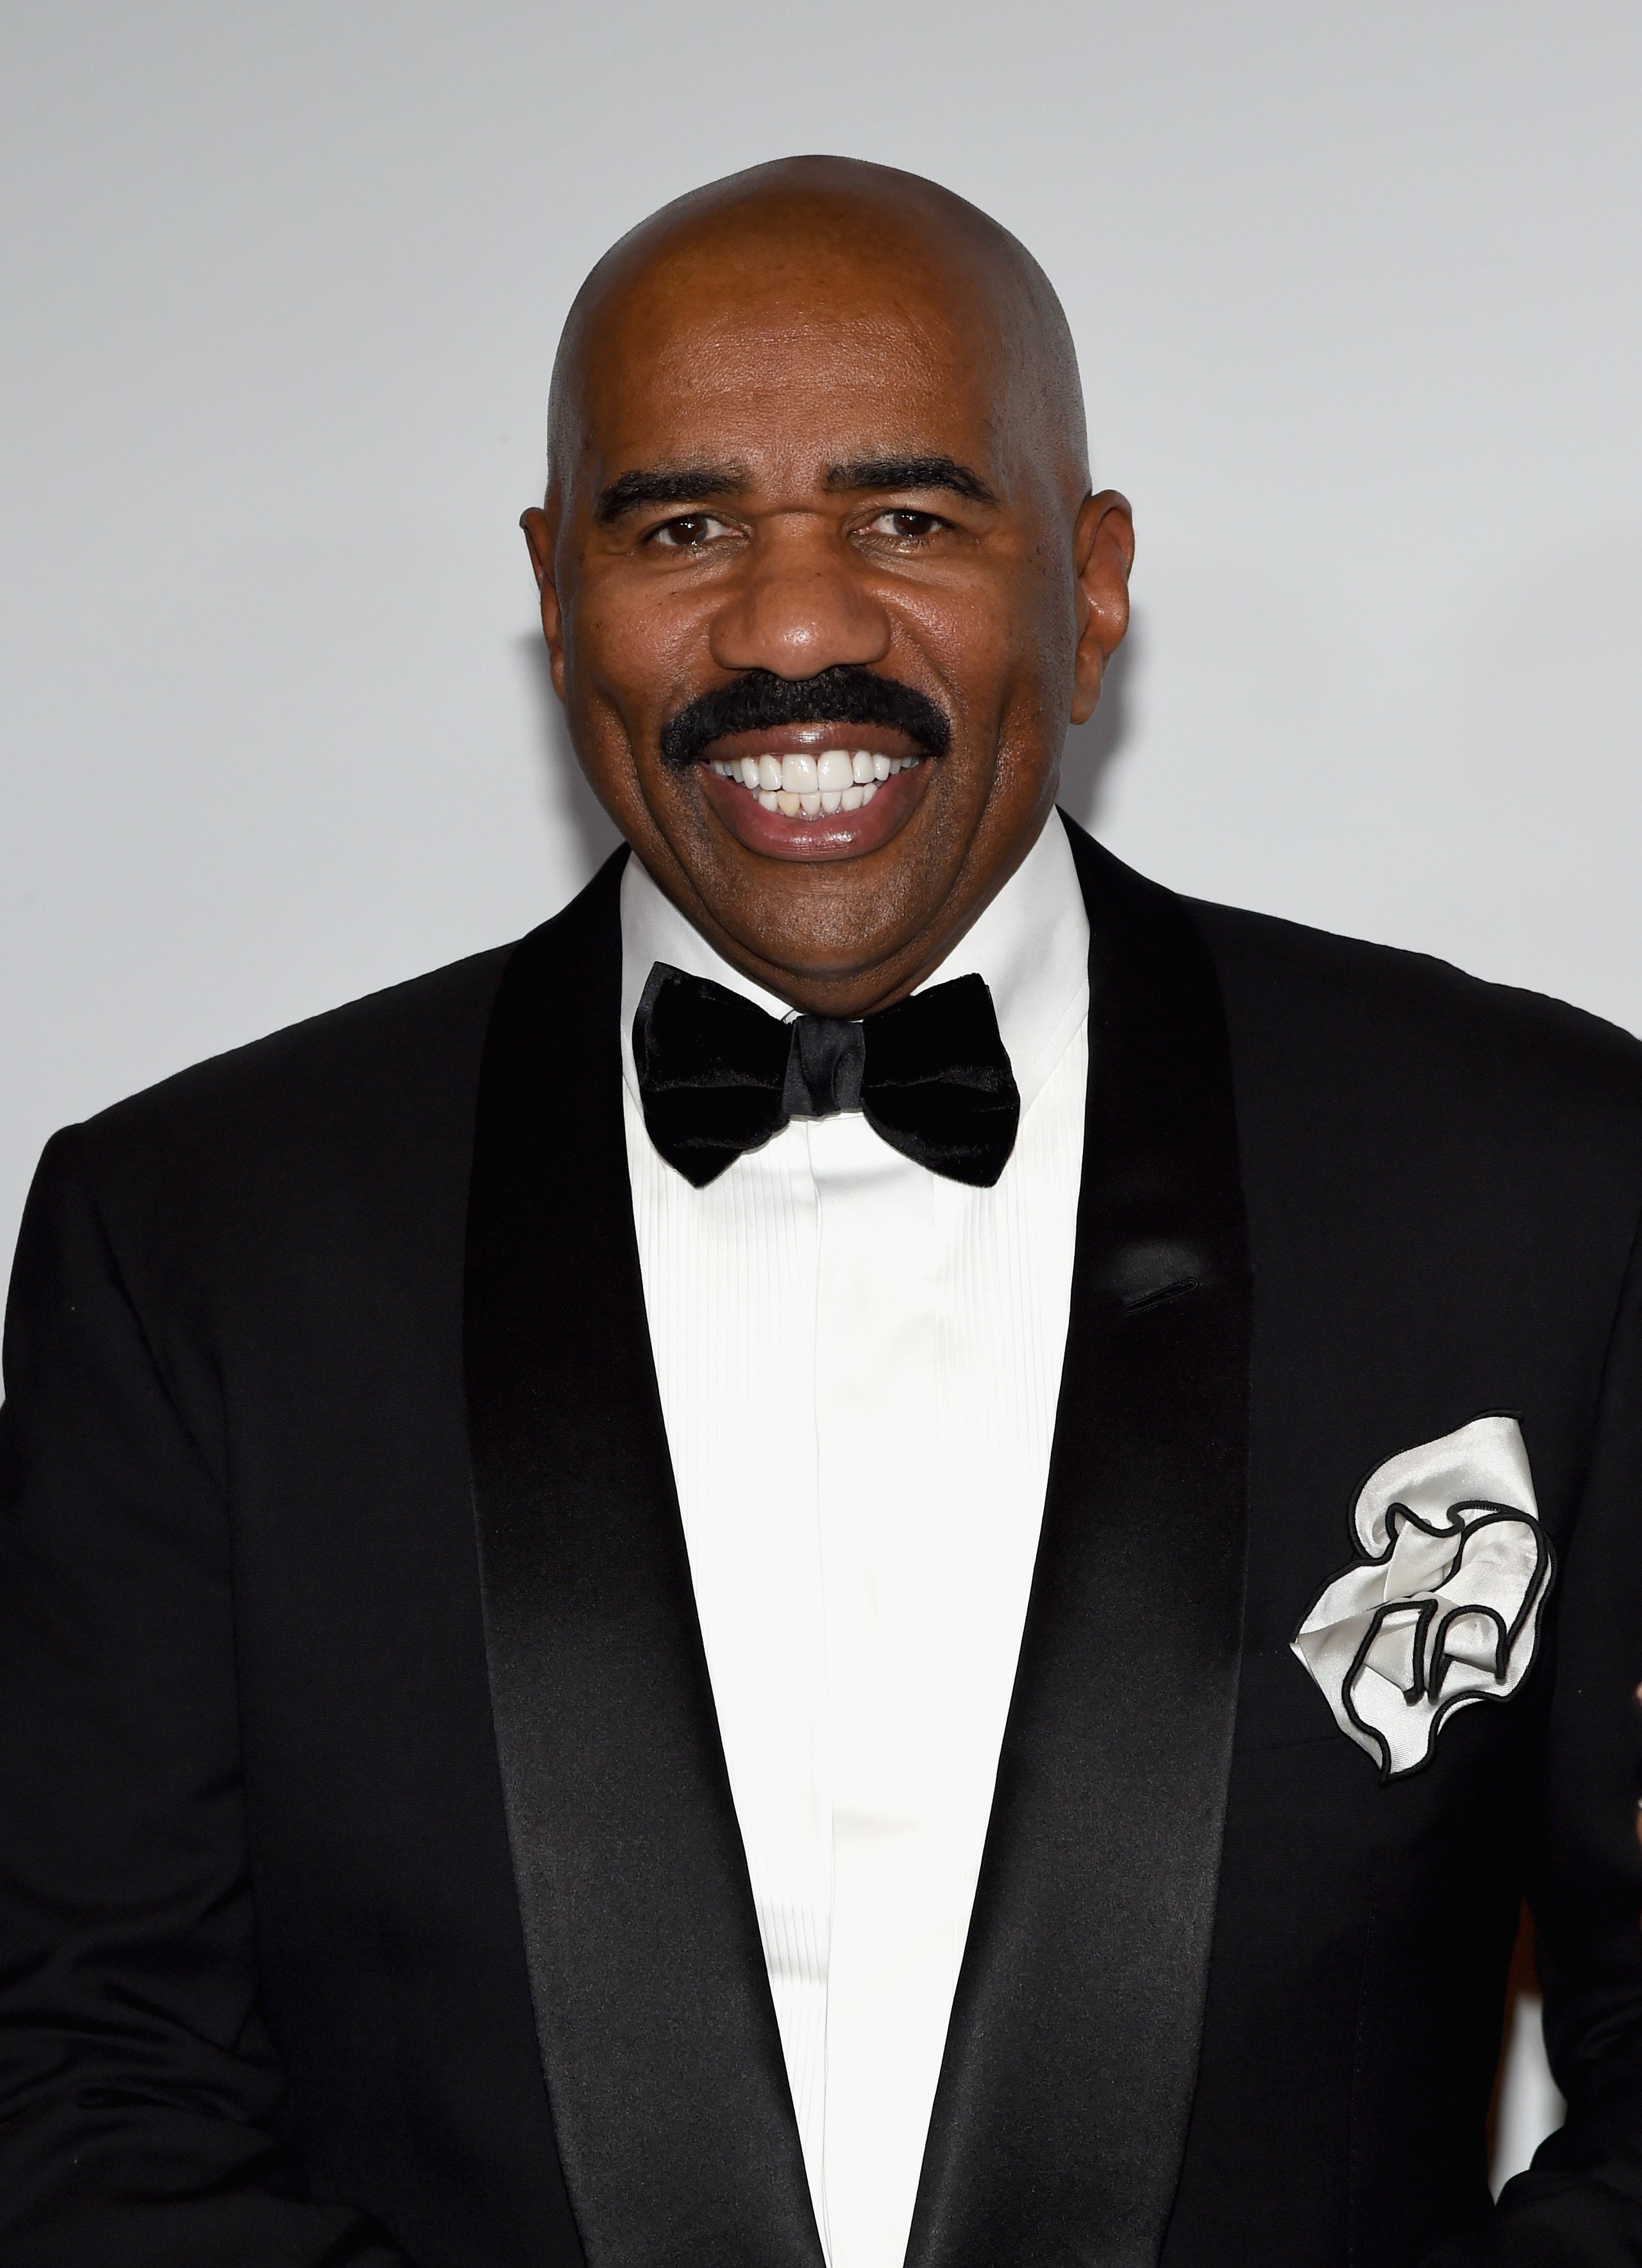 Steve Harvey attends the 2015 Miss Universe Pageant at Planet Hollywood Resort & Casino on December 20, 2015 in Las Vegas, Nevada. | Photo: Getty Images